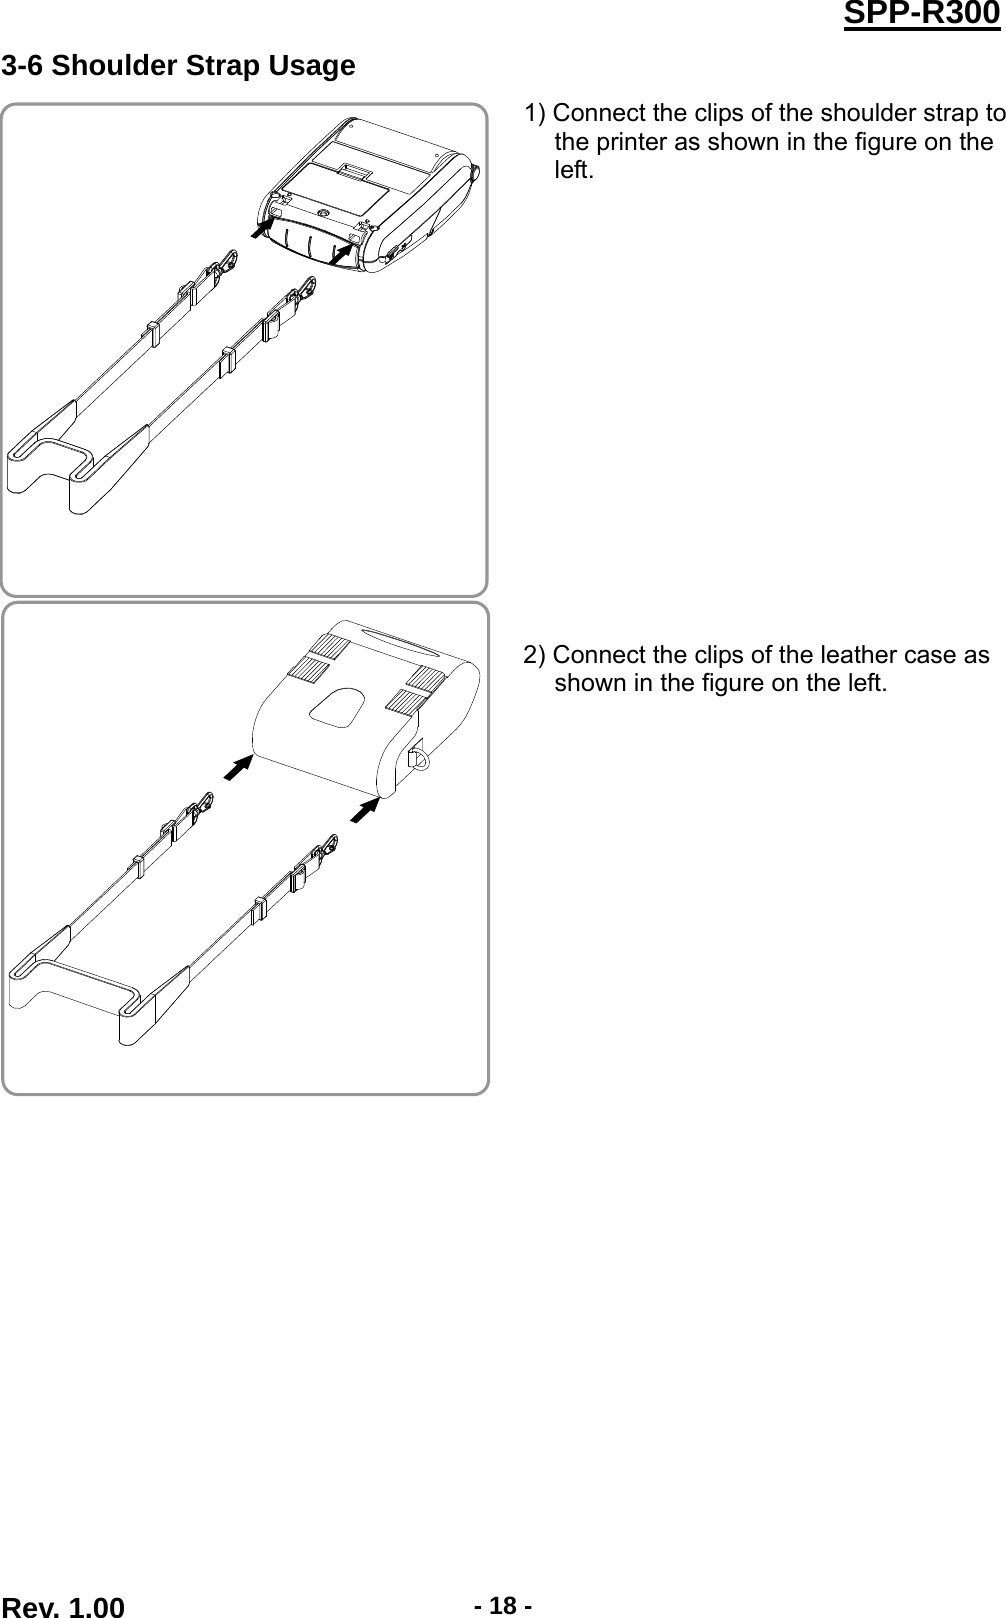  Rev. 1.00  - 18 -SPP-R3003-6 Shoulder Strap Usage   1) Connect the clips of the shoulder strap to the printer as shown in the figure on the left.               2) Connect the clips of the leather case as shown in the figure on the left.  